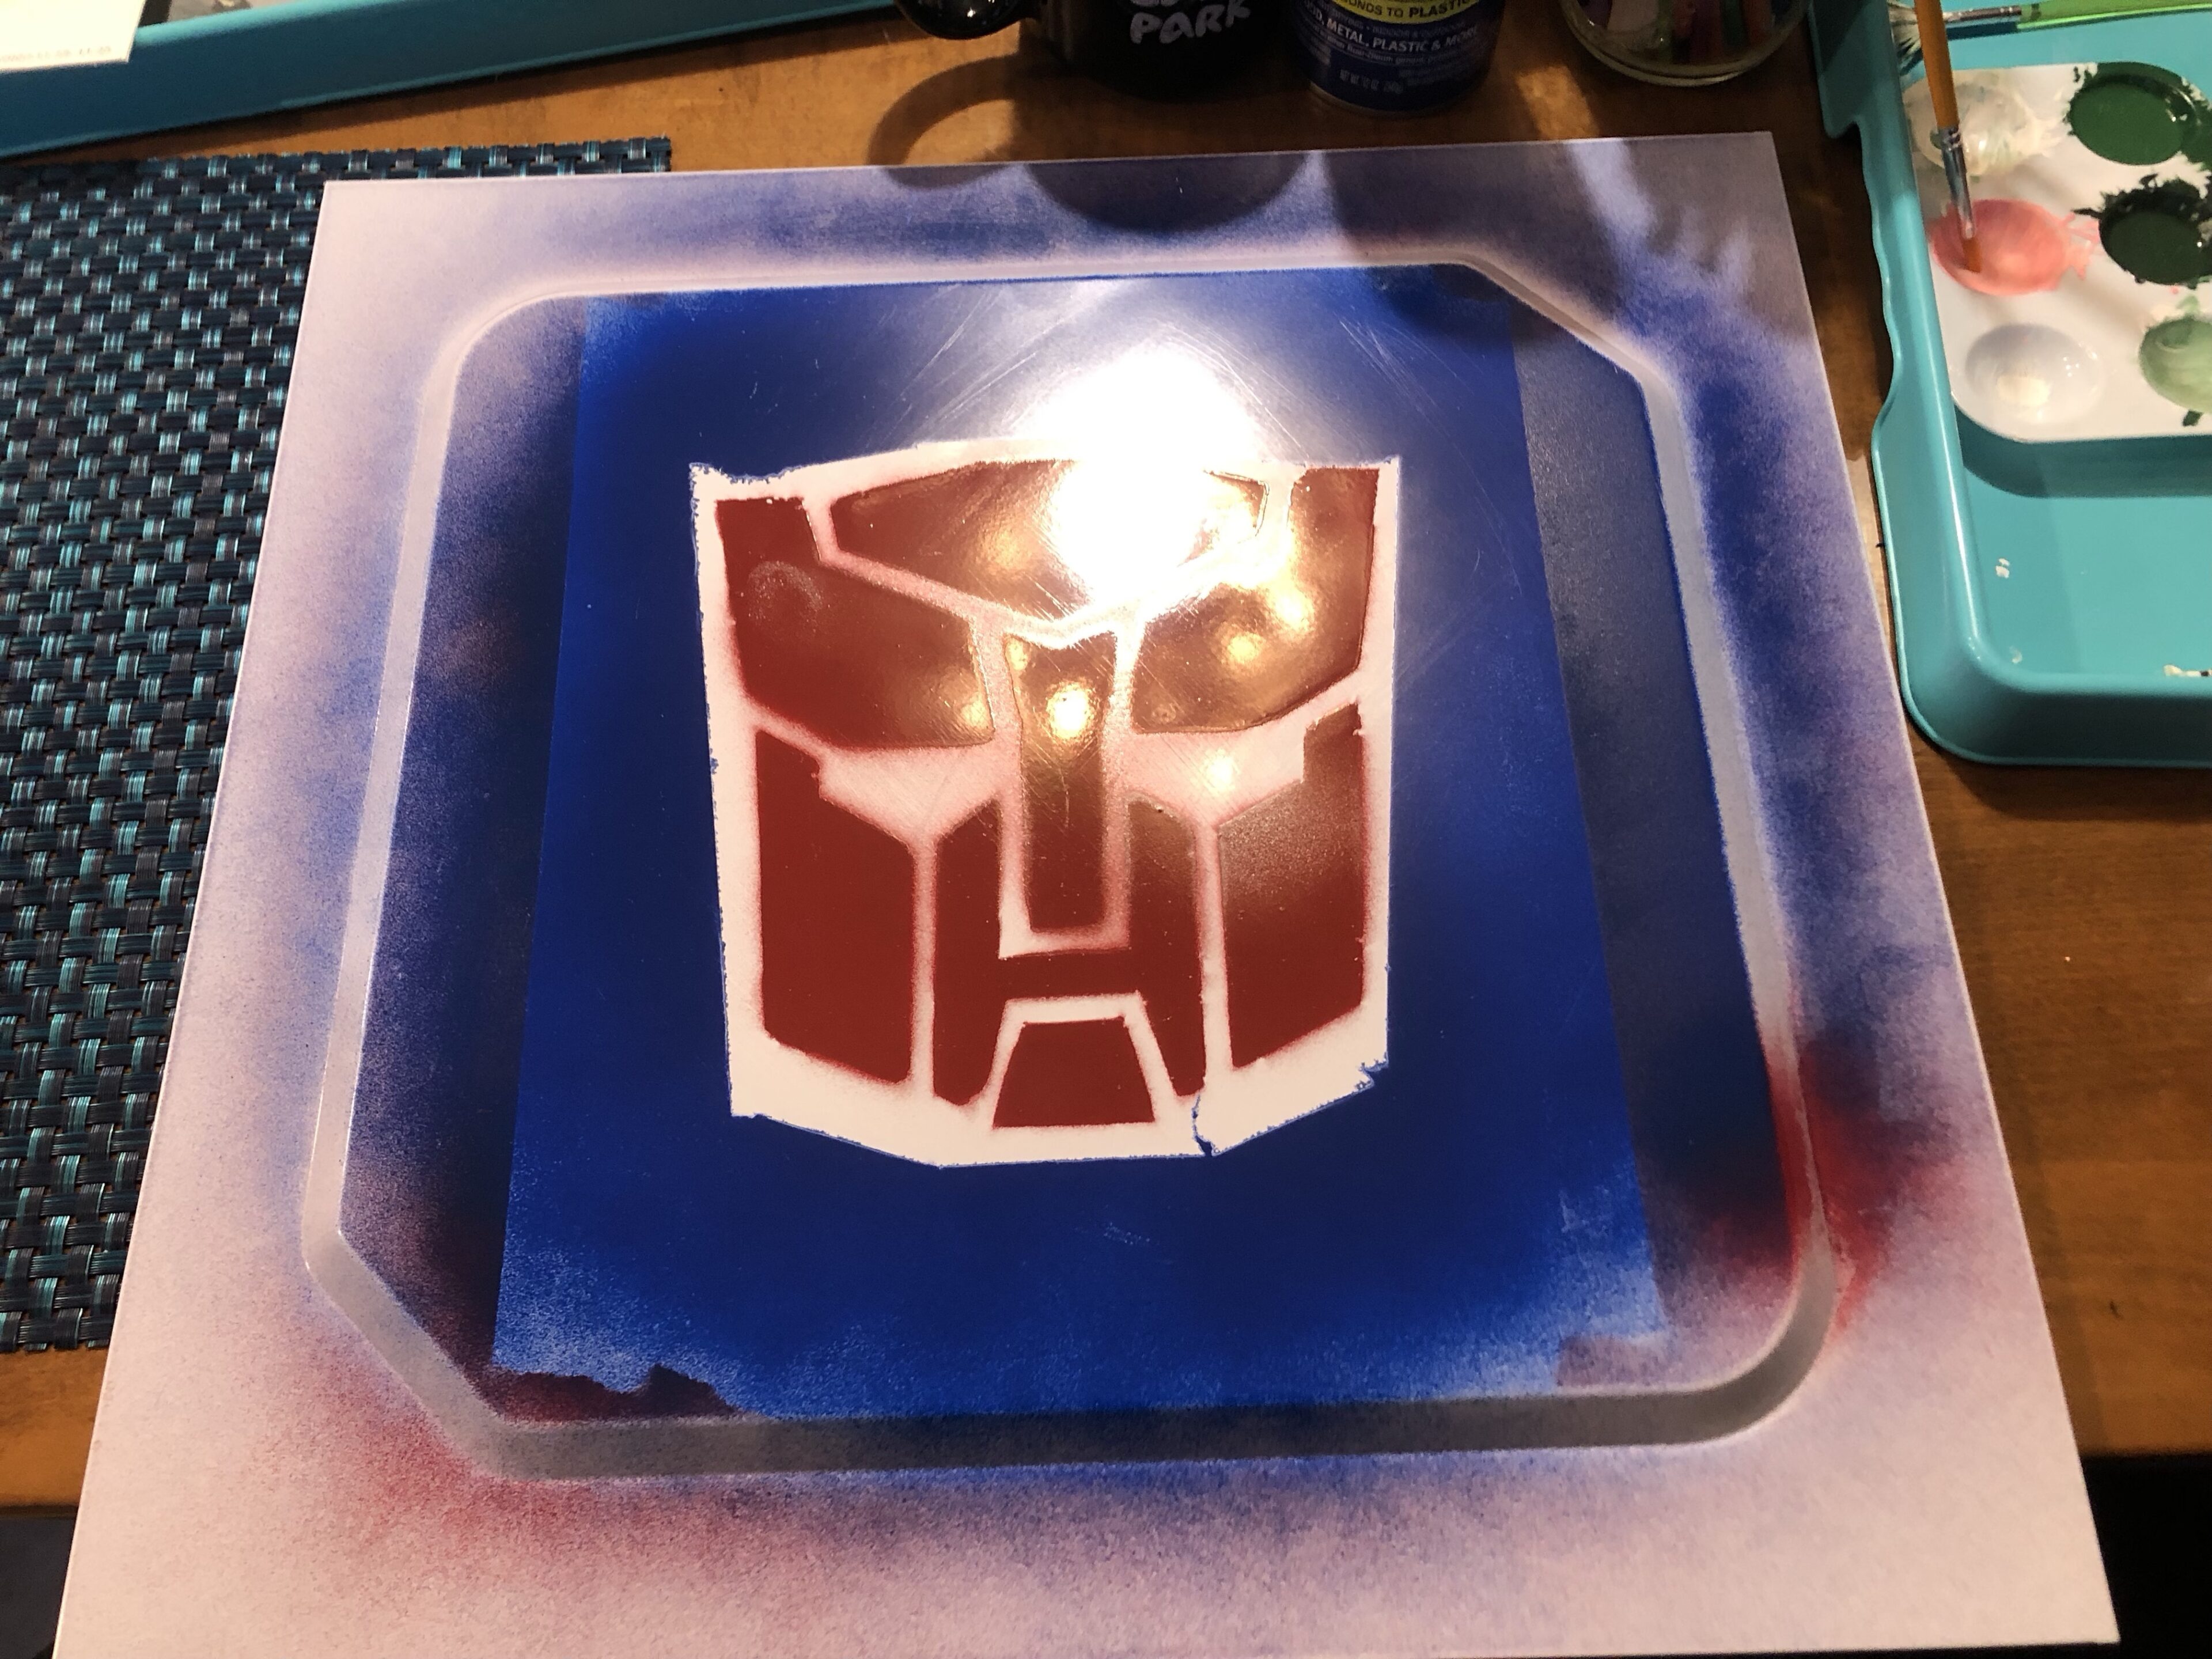 Spray painted autobot symbol on computer case side